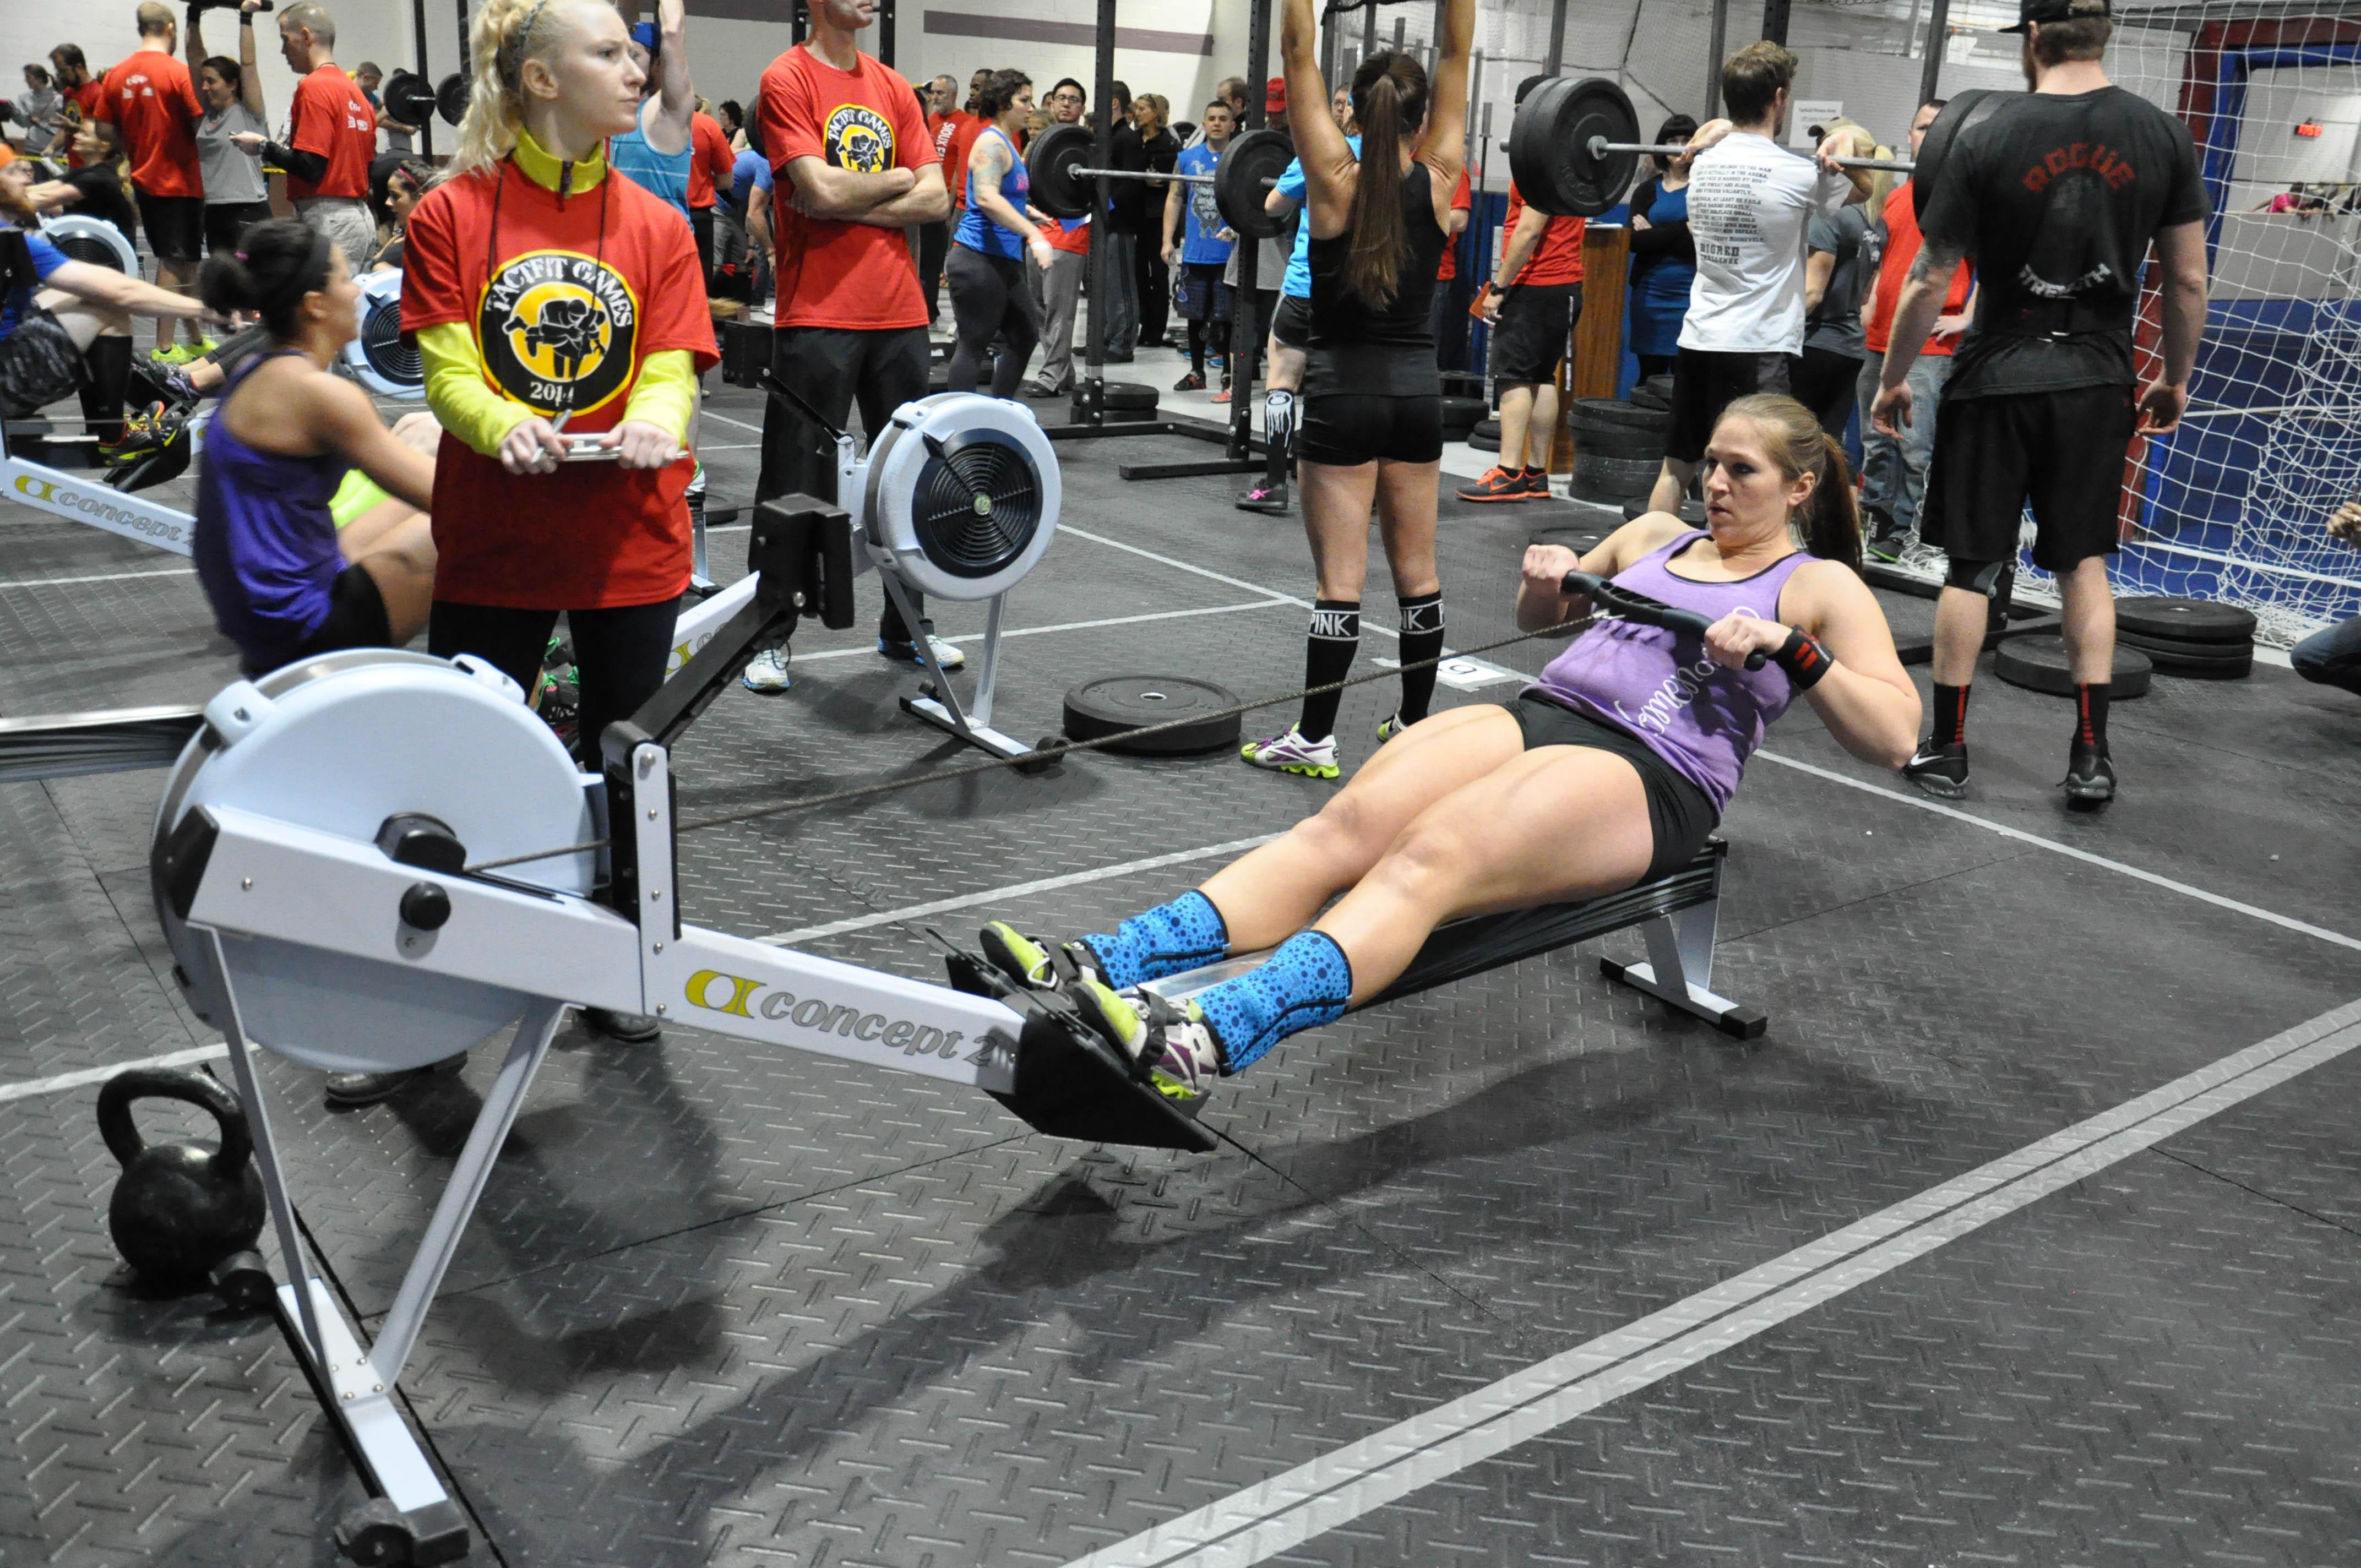 Does Rowing 'Count' as Strength Training—or Is It Just a Cardio Workout?